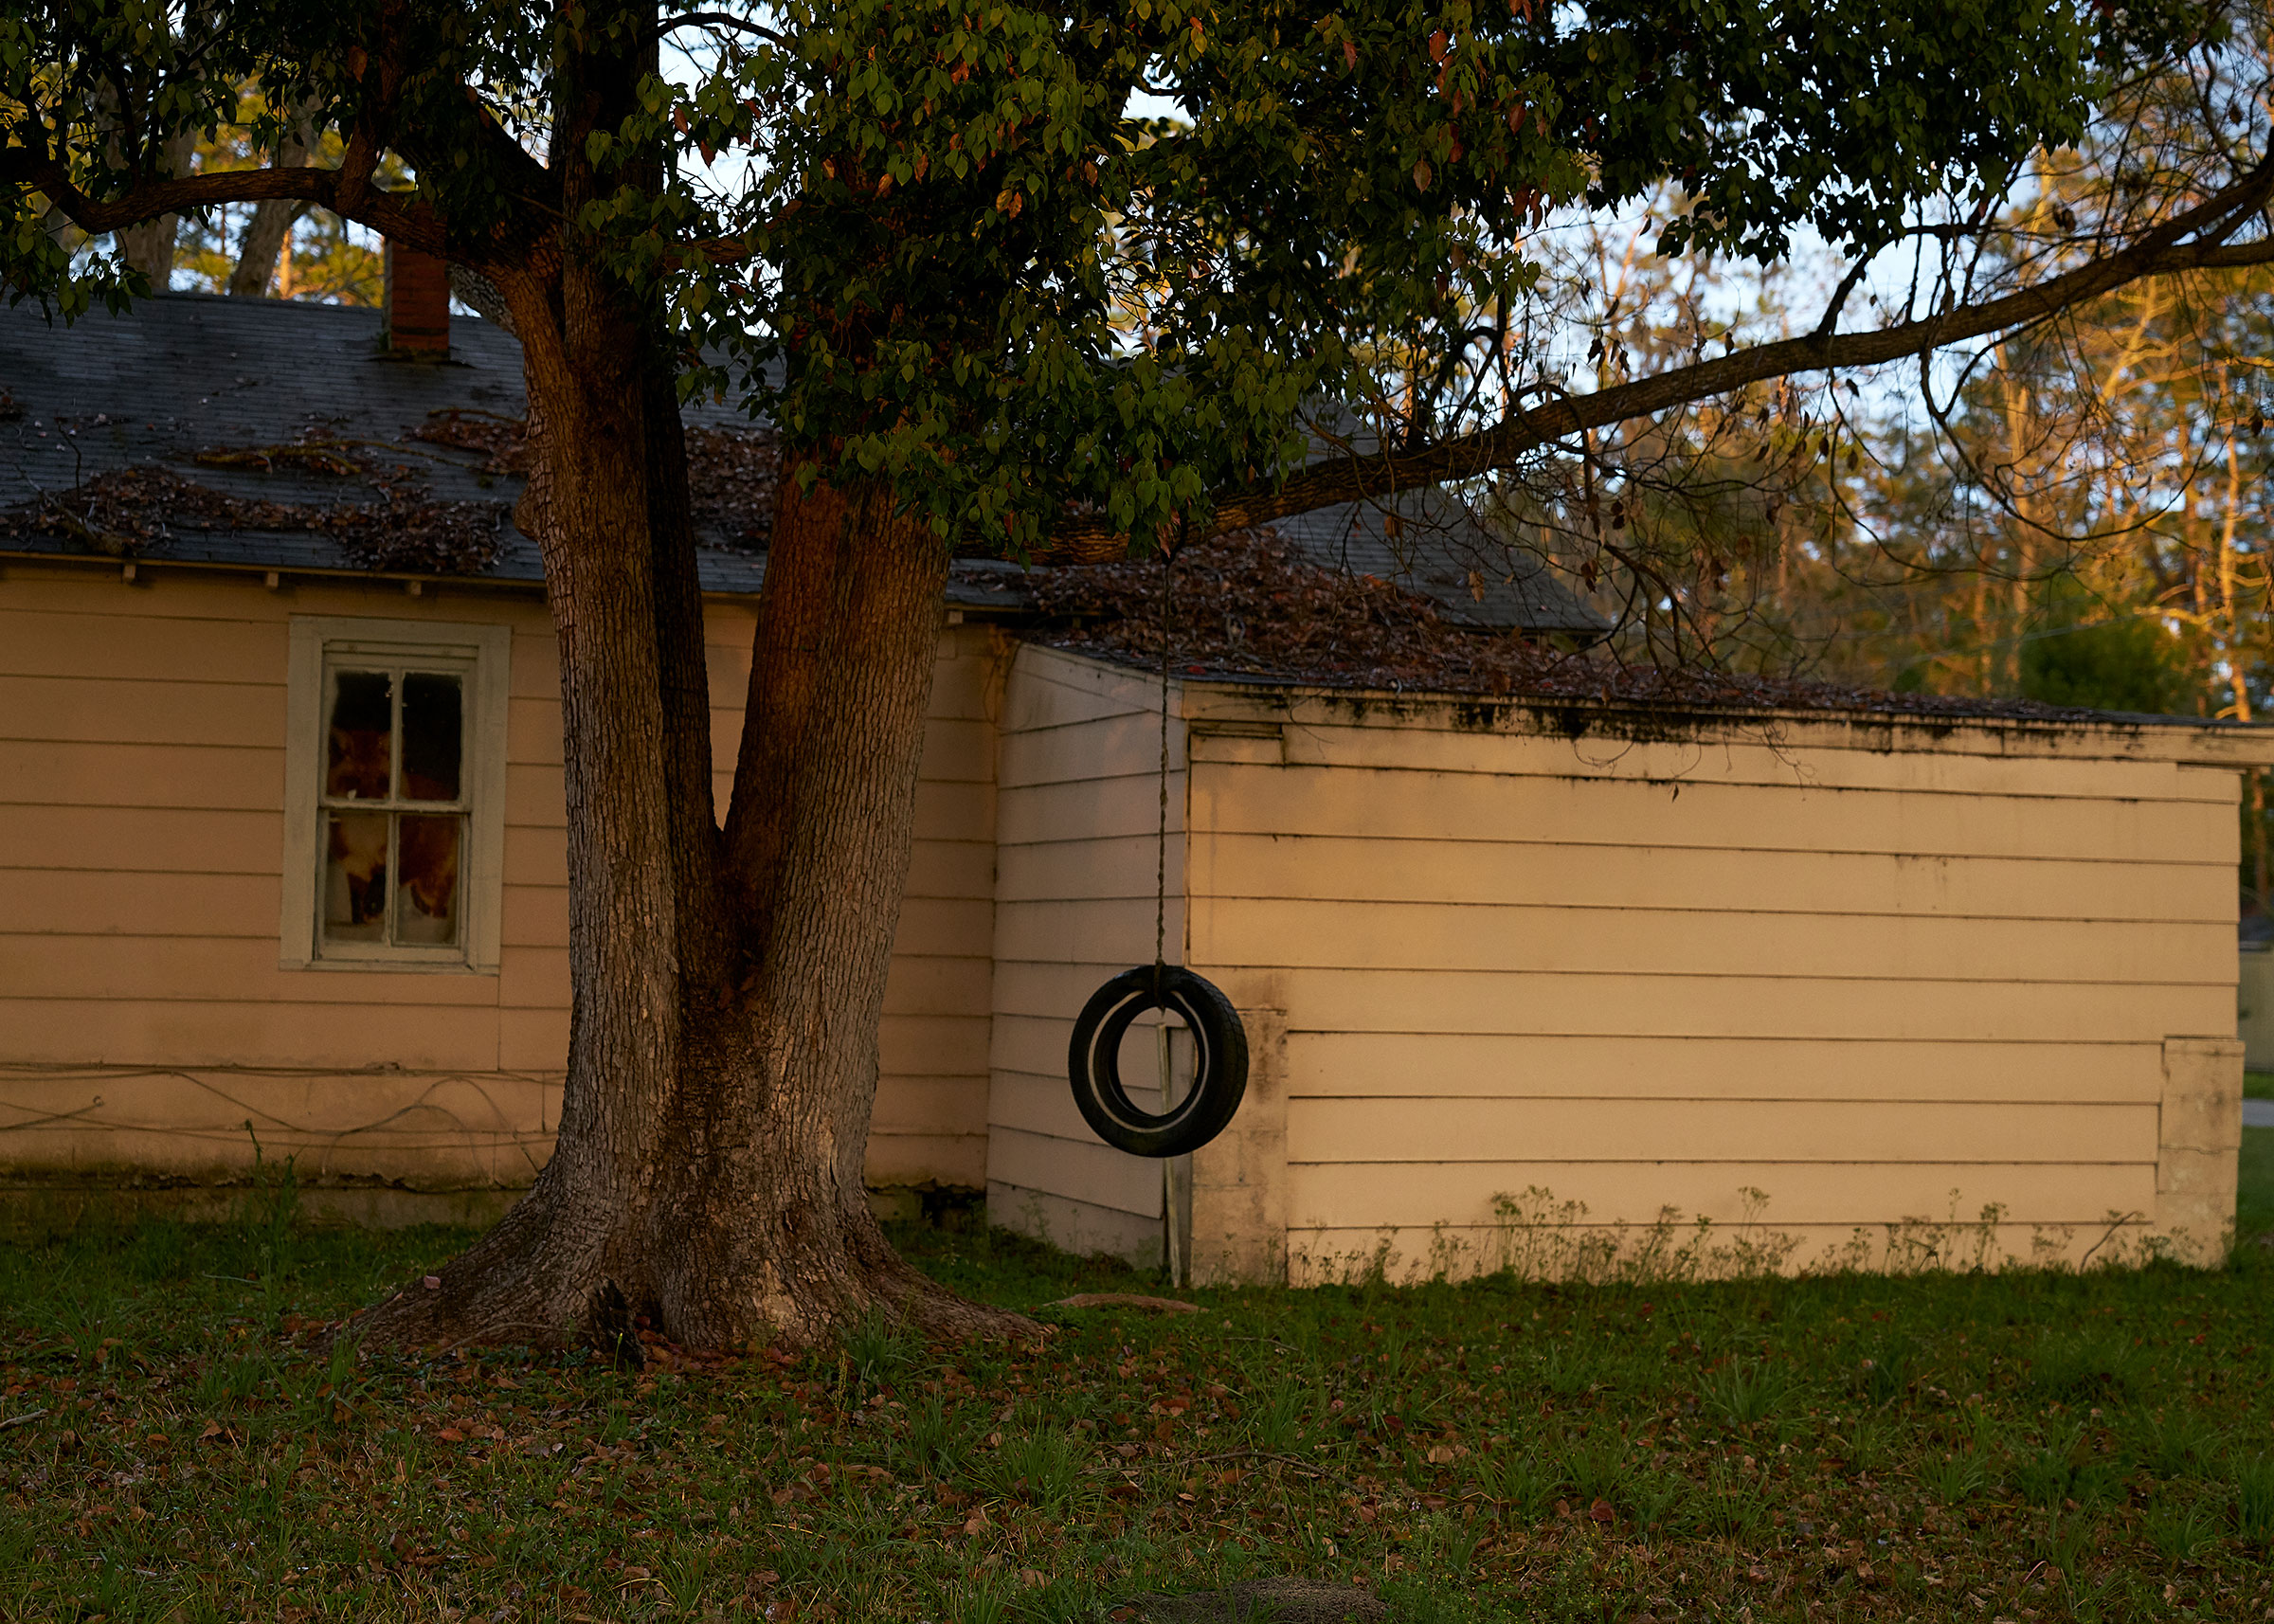 The population of rural Homerville, Ga. is now down 27% since 1980, which has hurt its hospital, Clinch Memorial. (Stacy Kranitz for TIME)